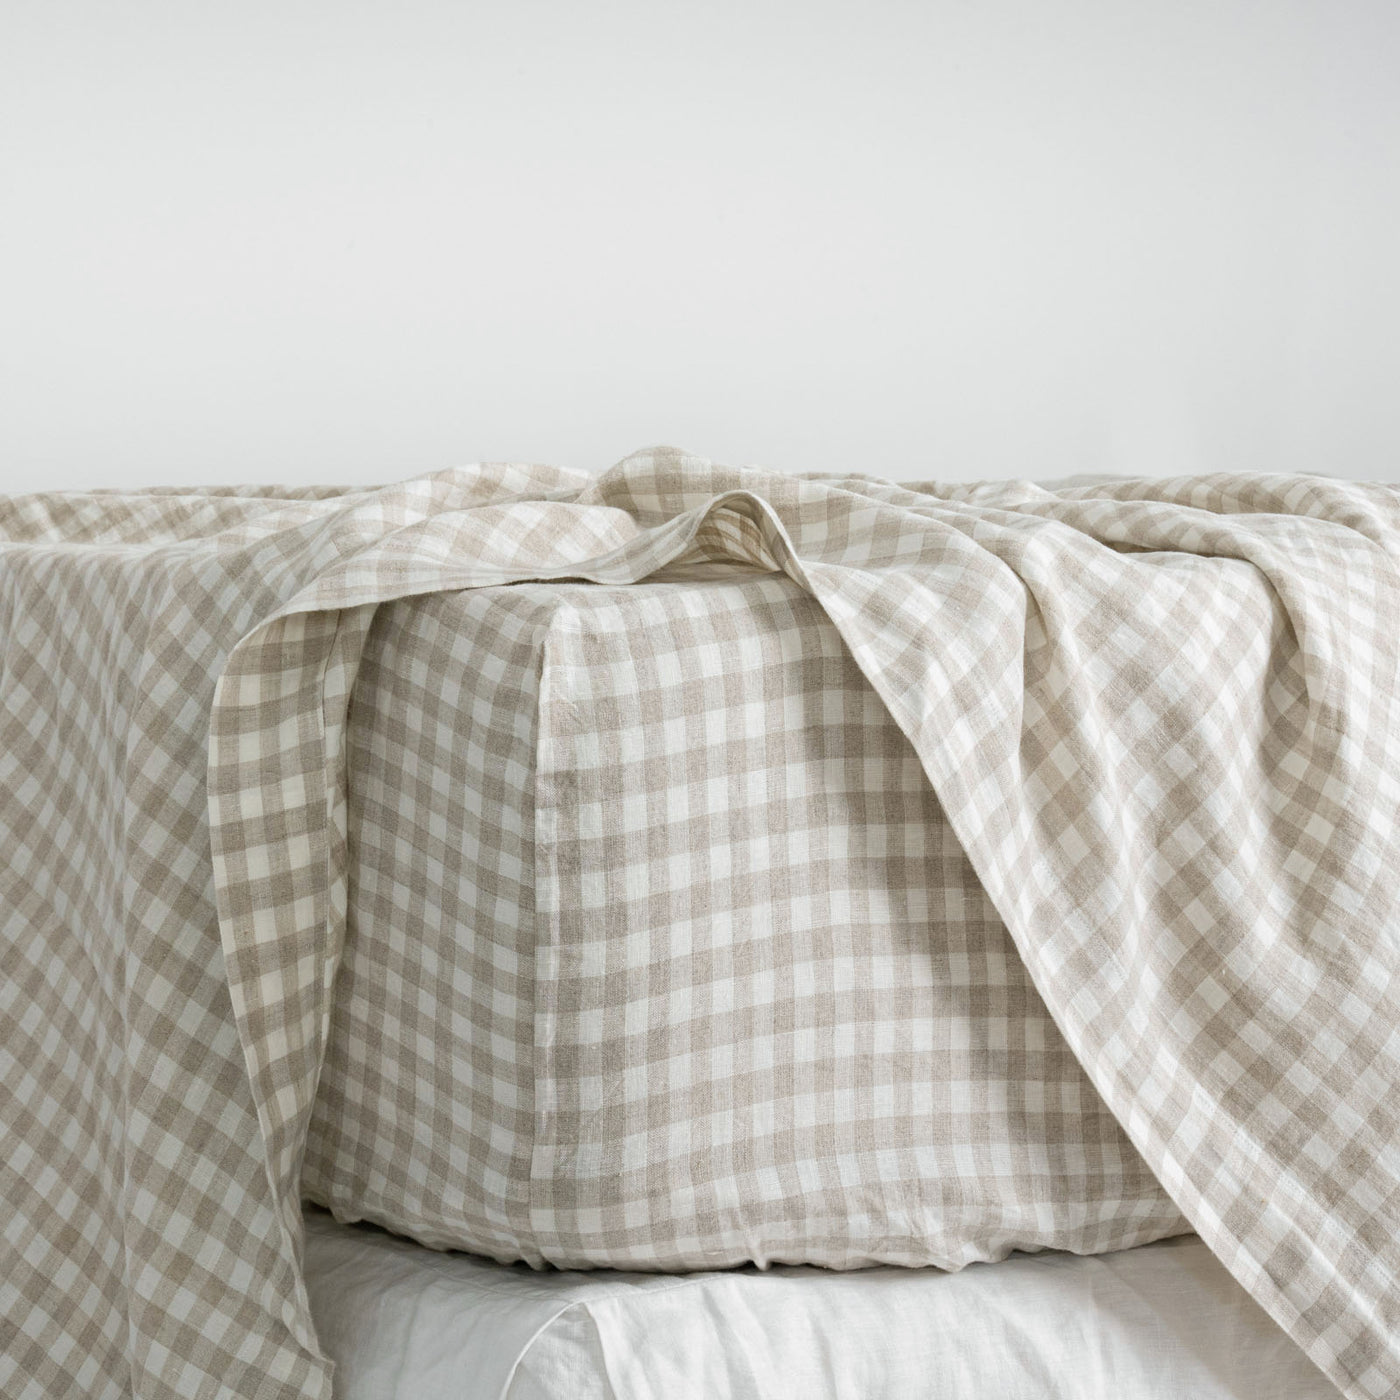 French Flax Linen Fitted Sheet in Beige Gingham